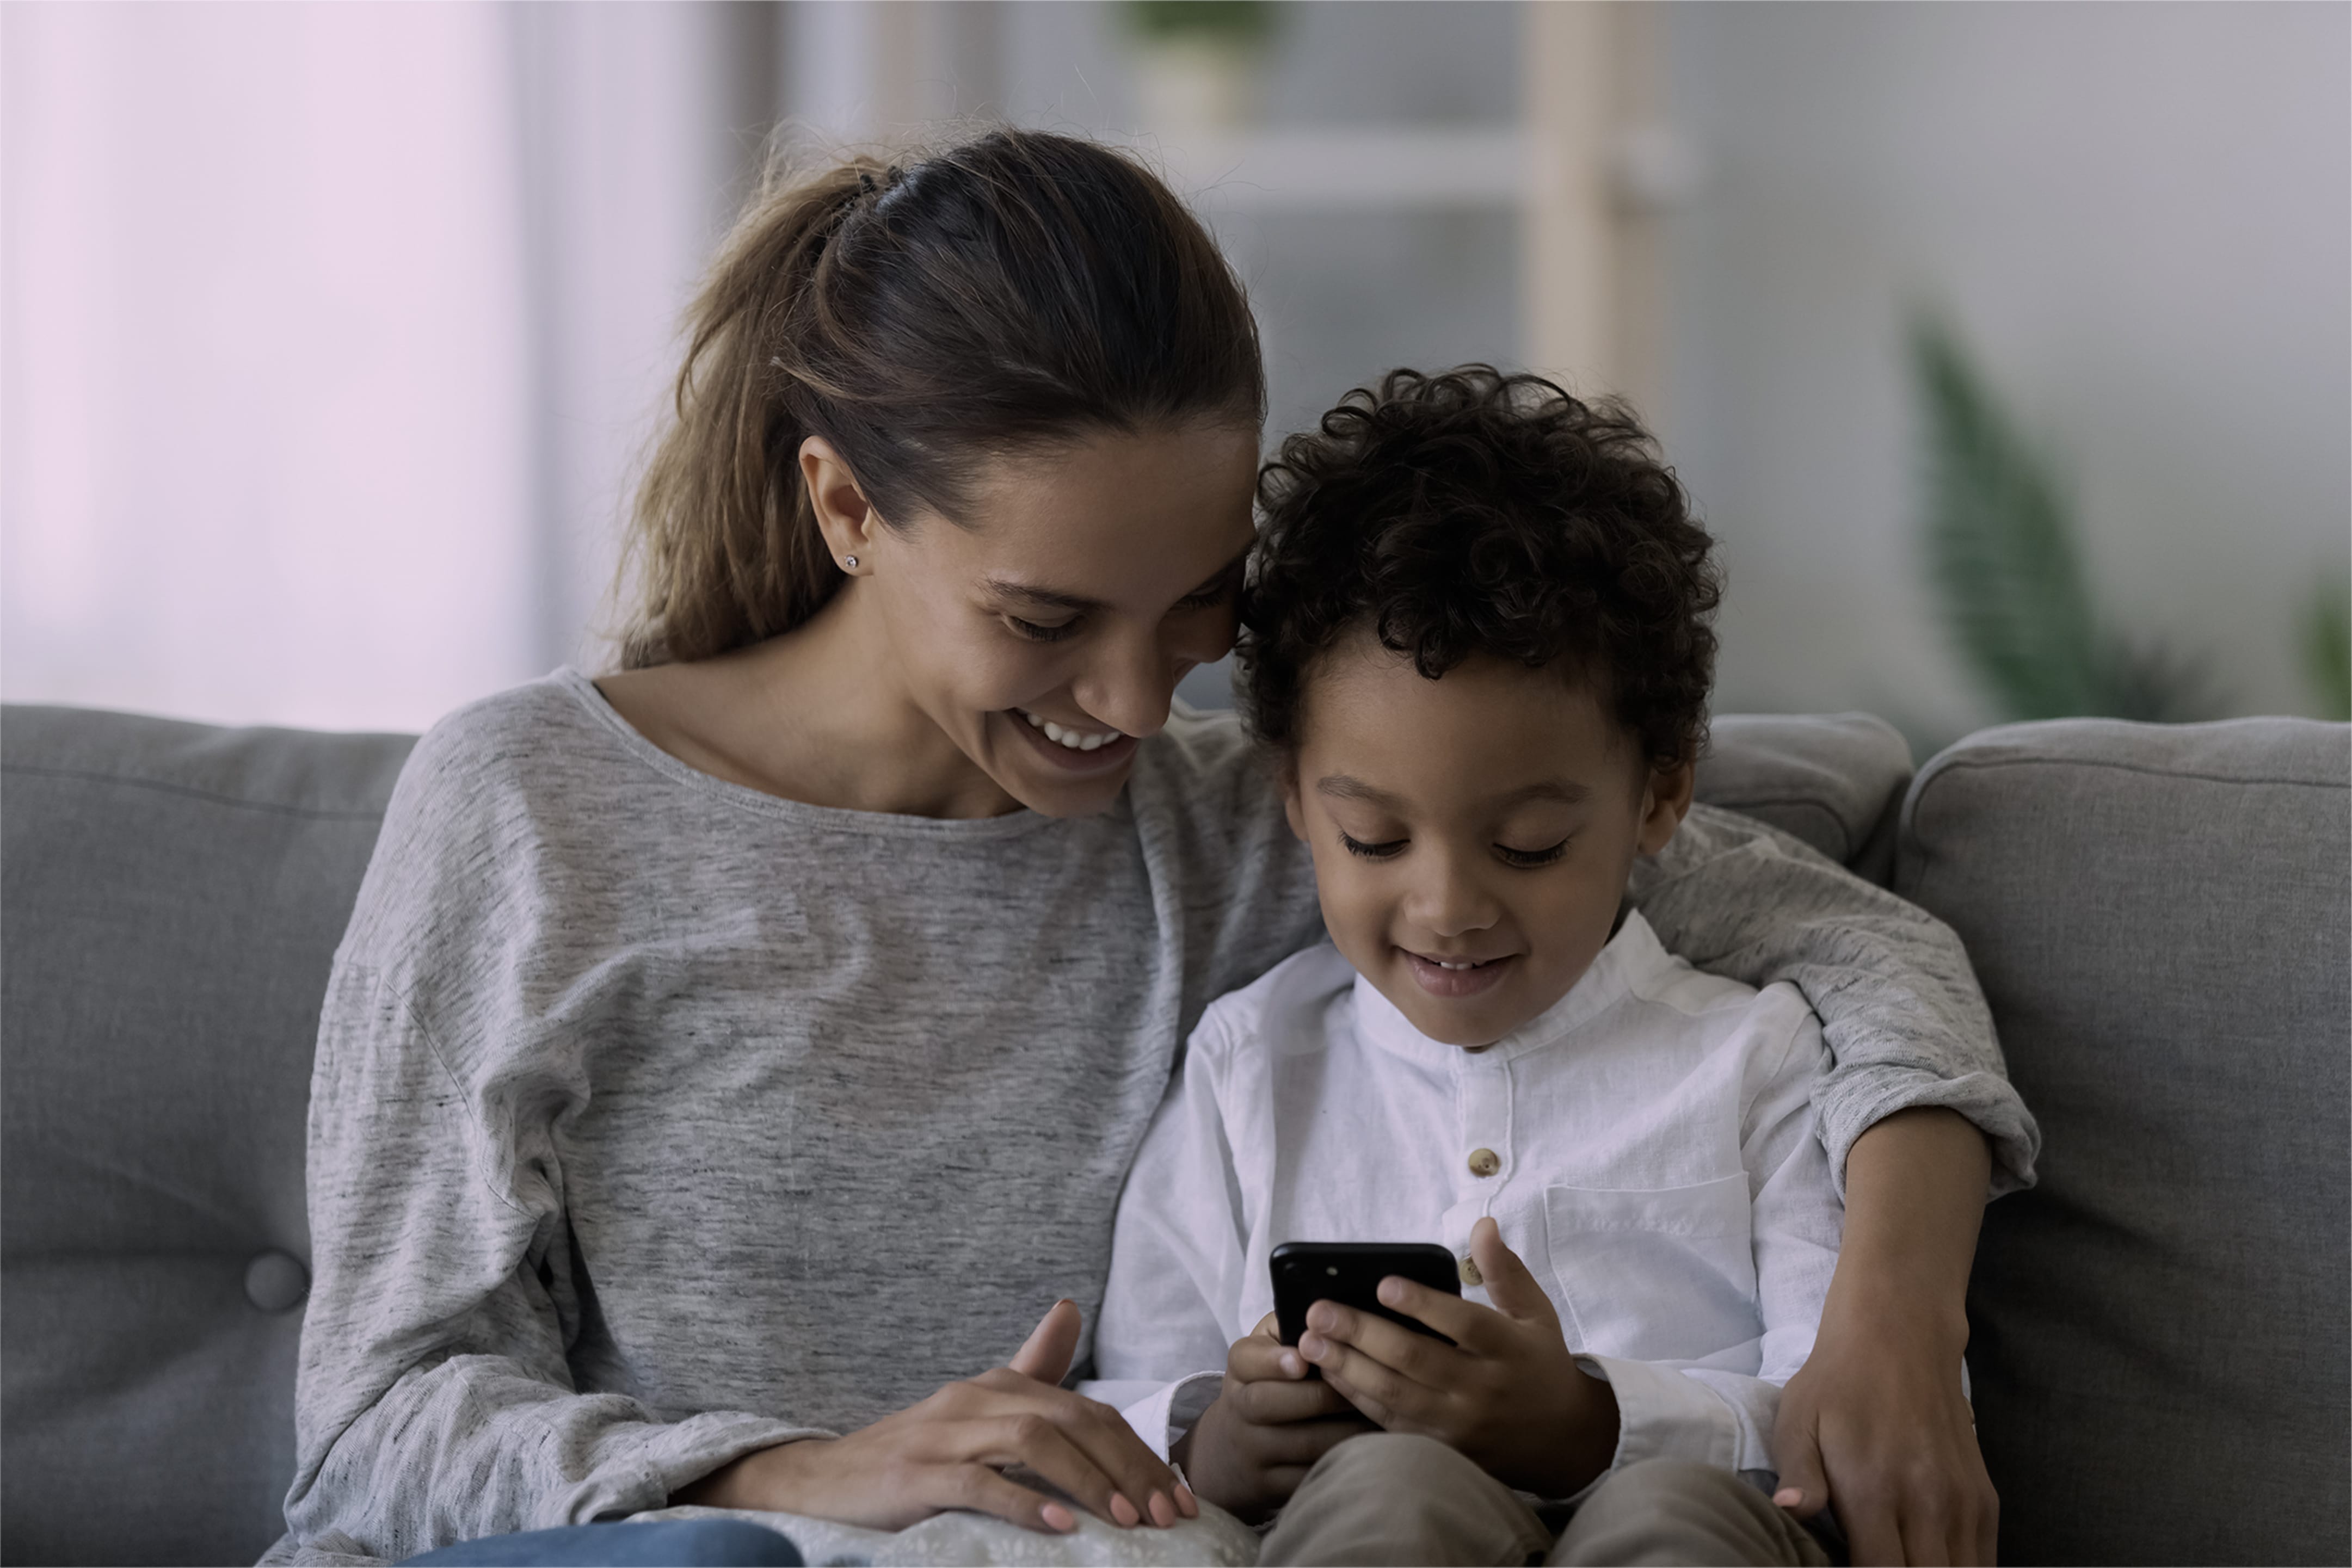 A woman and her child on a sofa, looking at a mobile device together